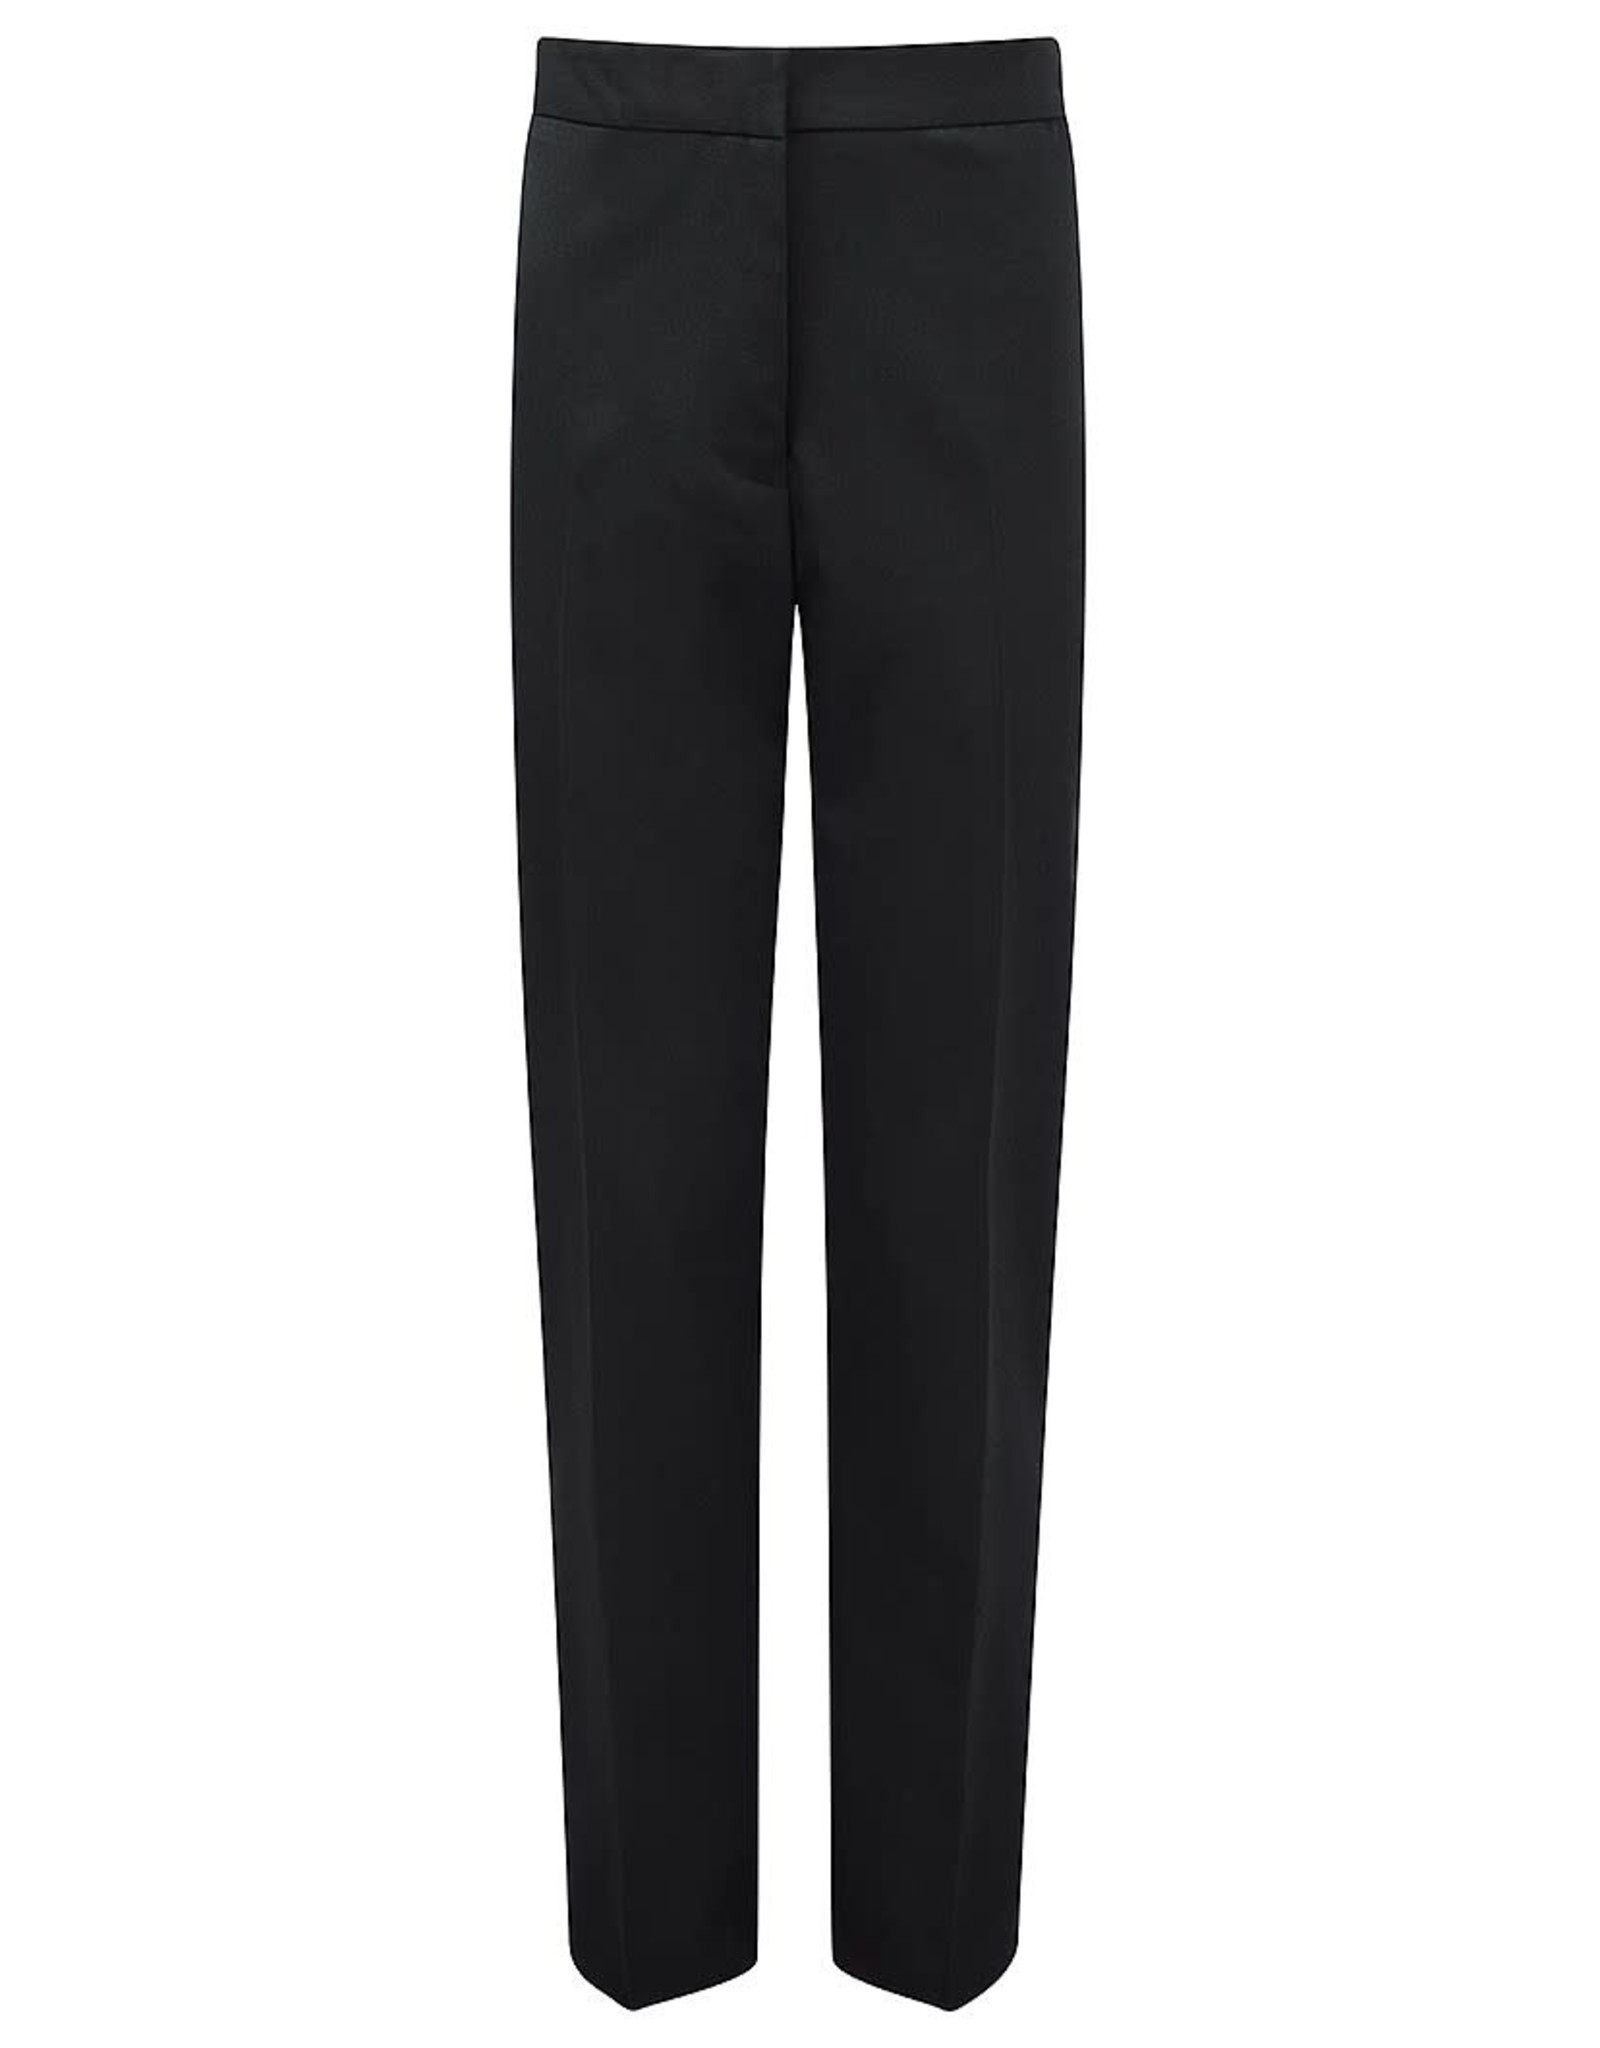 ASPIRE Girls Slimfit Trousers Adult Size